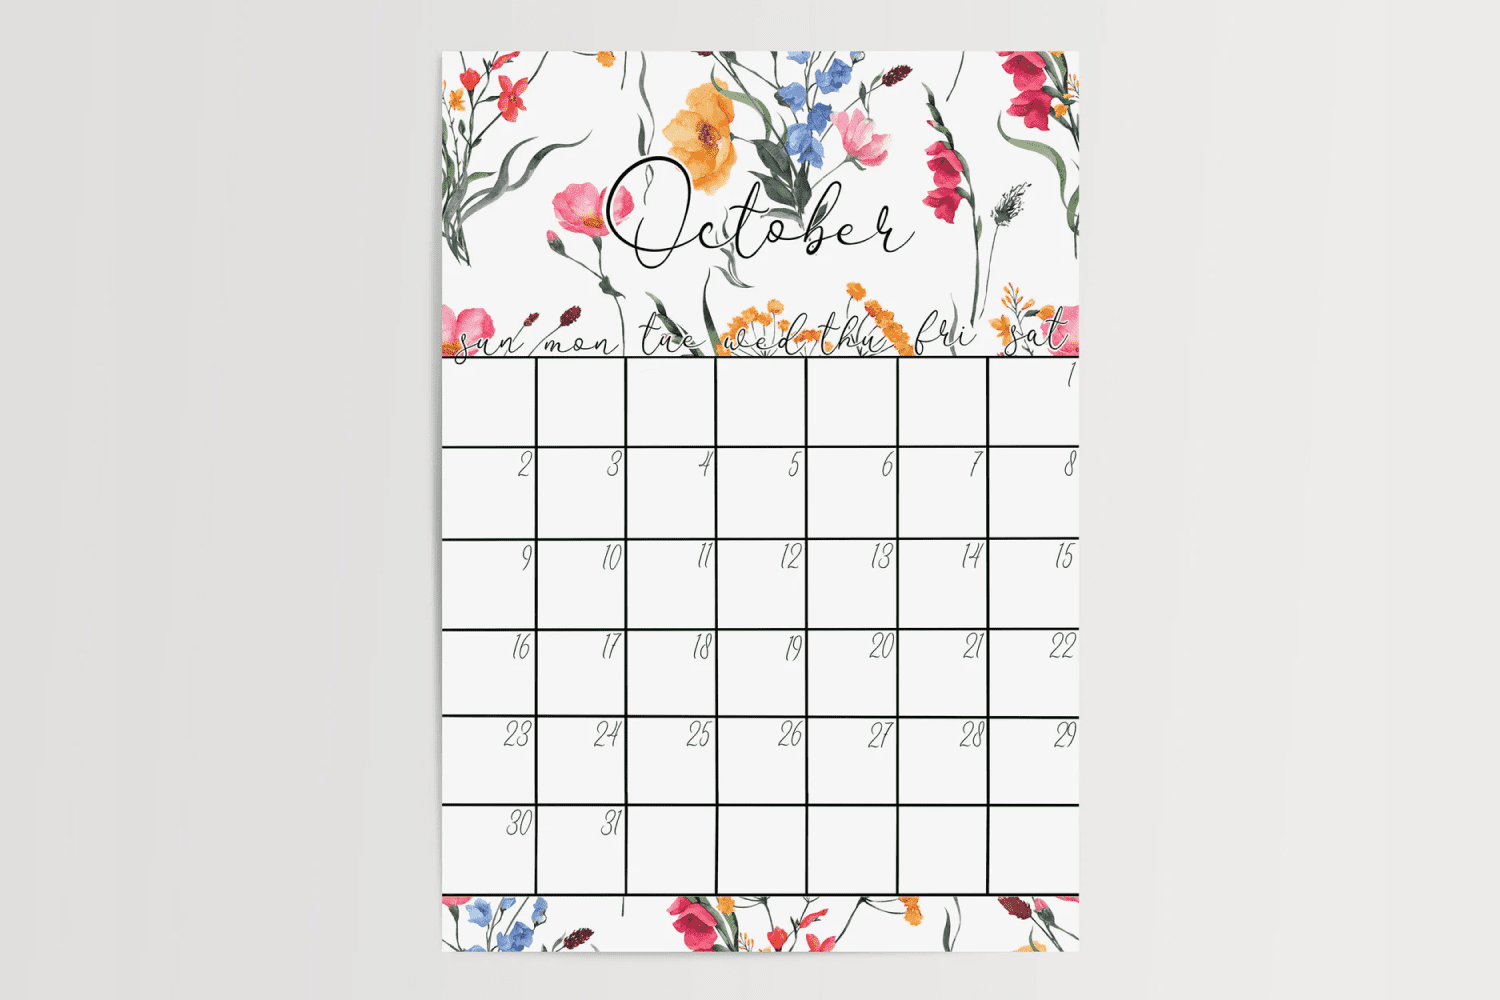 October calendar with white background and bright wildflowers.